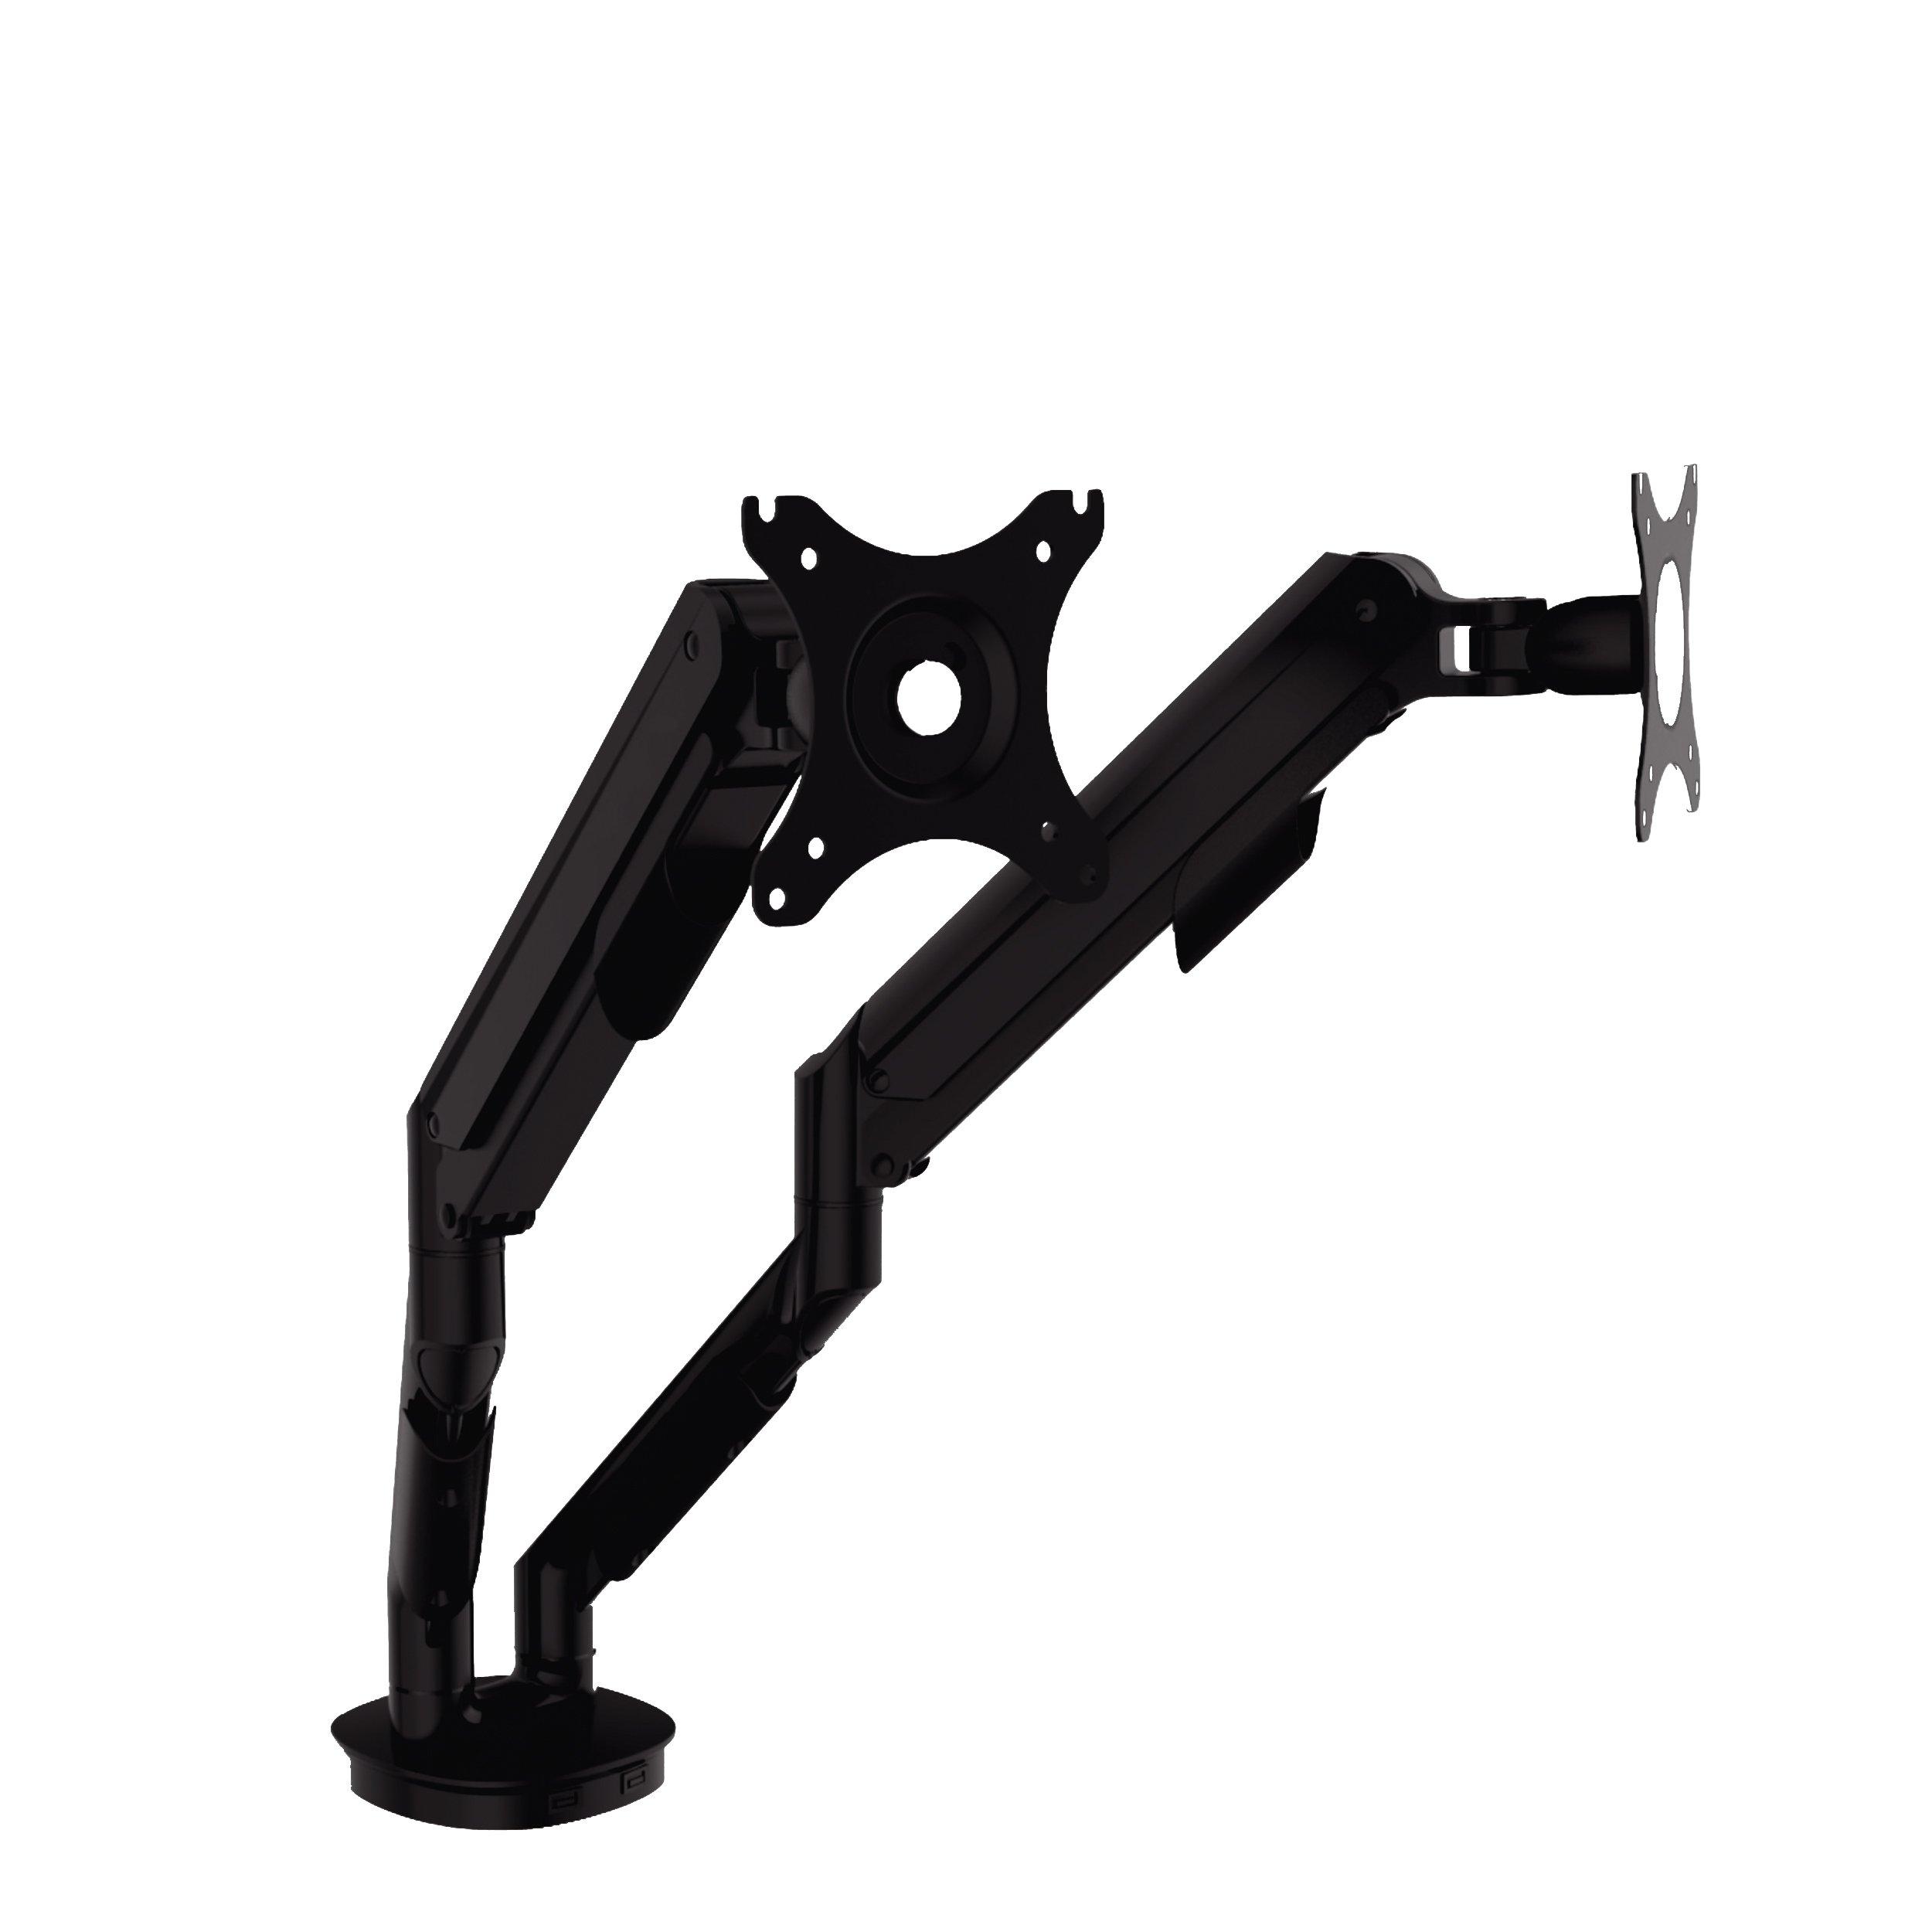 TygerClaw 17-in to 30-in Double Extending Gas Spring Arms Monitor Desk Mount